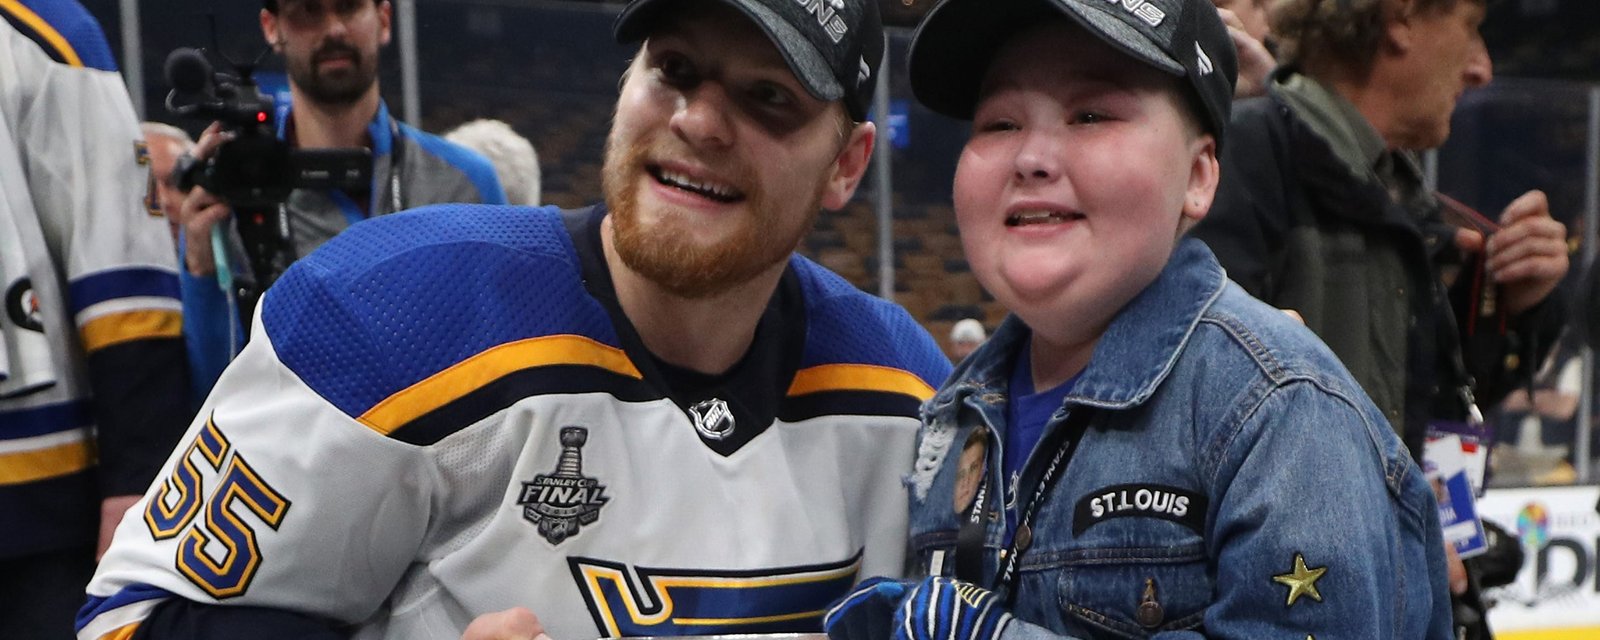 Superfan Laila Anderson gets her name on Stanley Cup ring and her own bling!